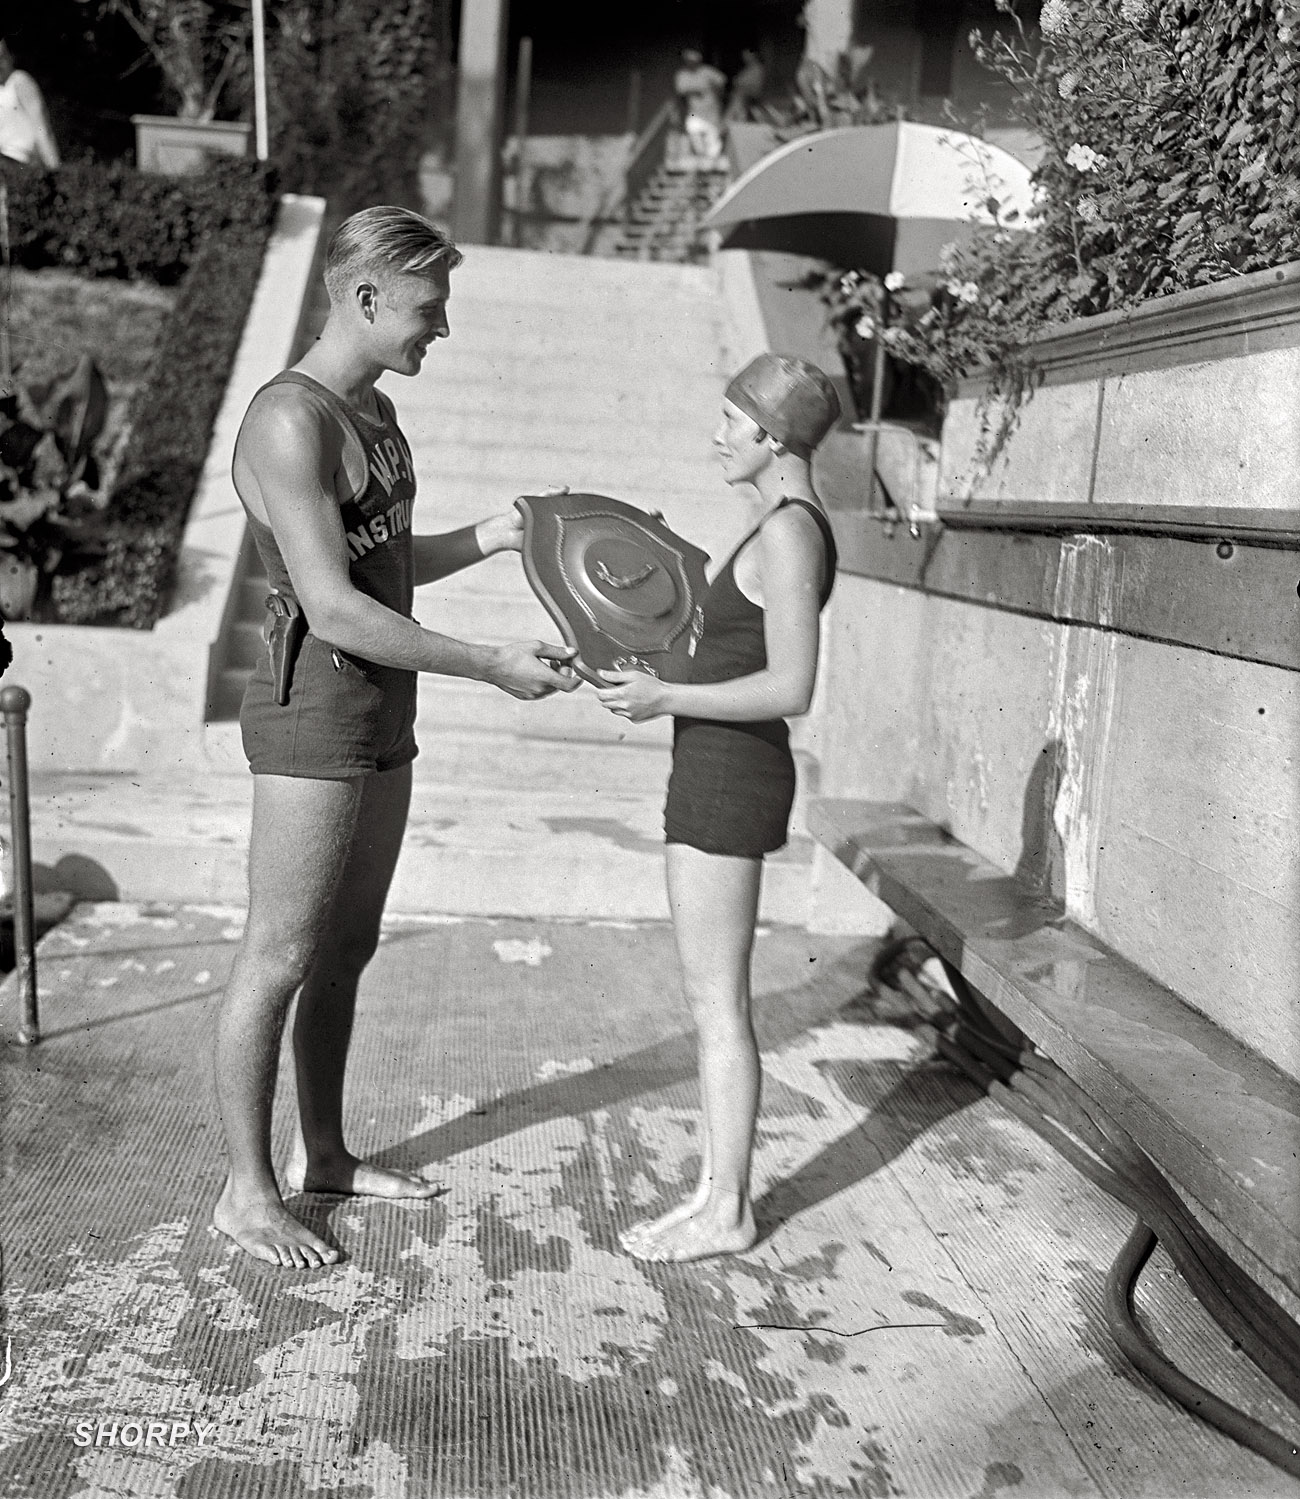 Washington, D.C., 1925. "Jerry Mangan and Ione Whalen, Wardman Park Pool." National Photo Company Collection glass negative. View full size.